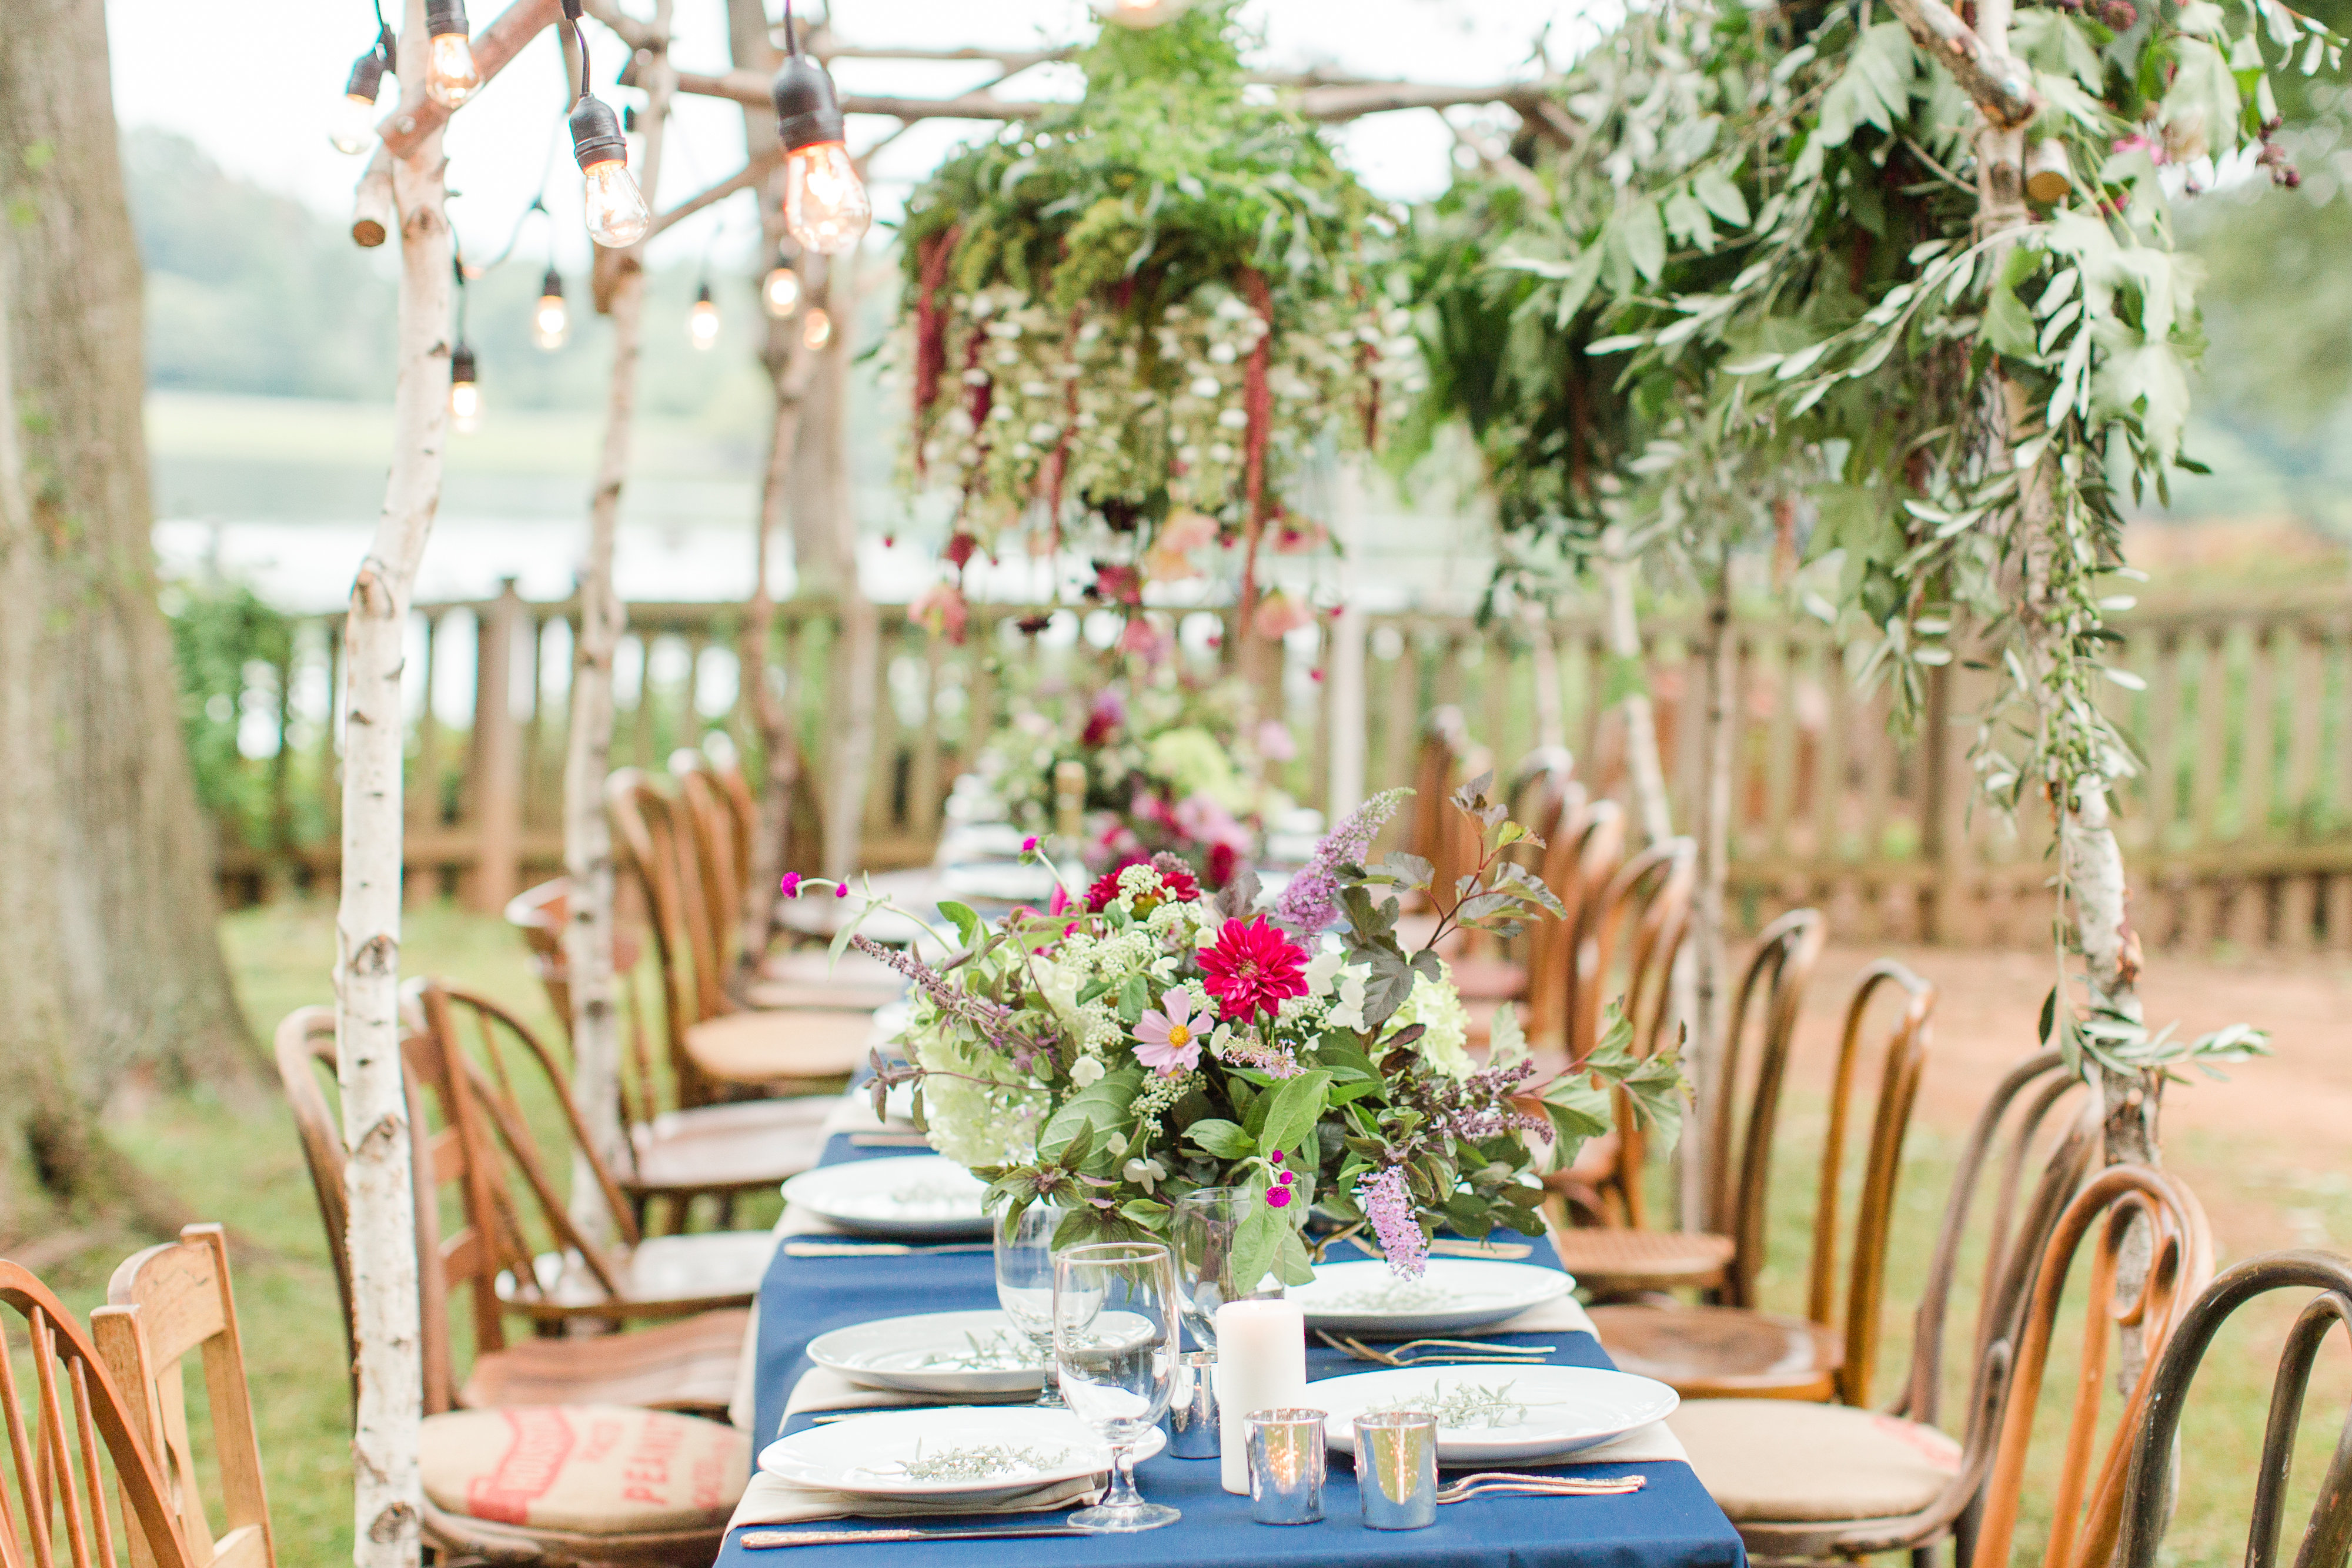 View More: http://katelynjames.pass.us/floral-collective-conference